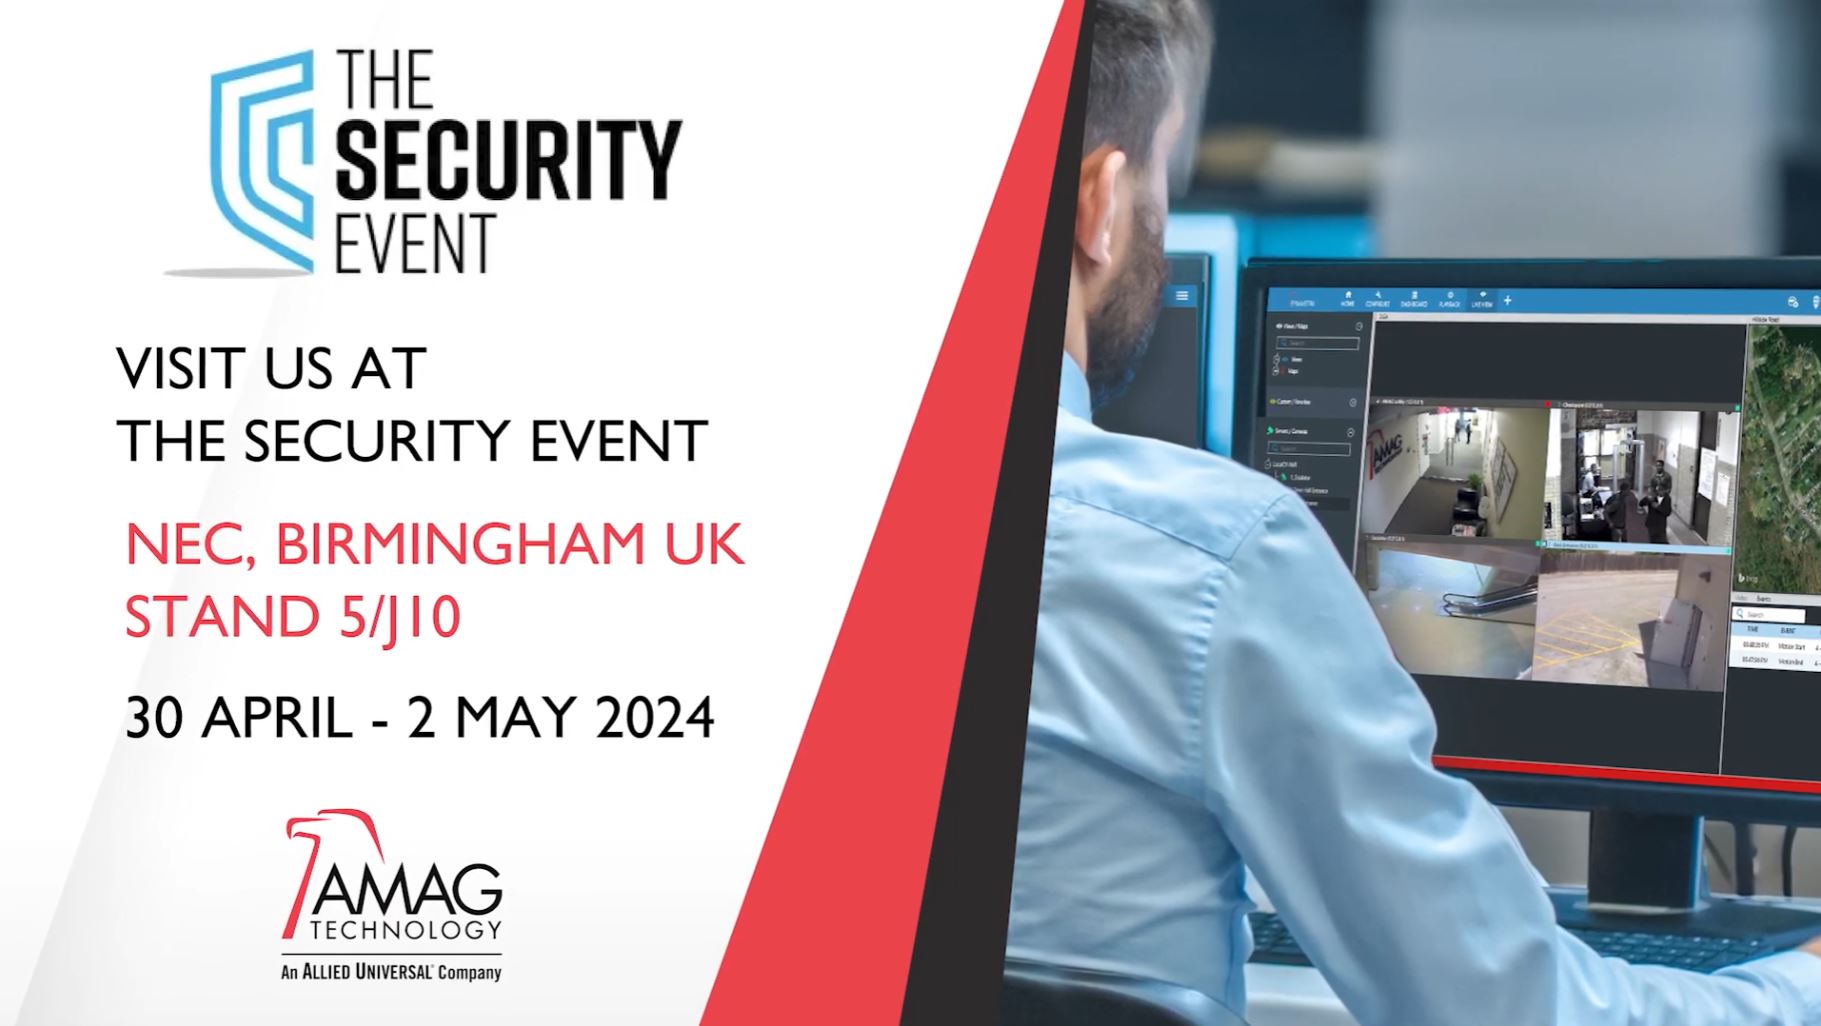 Visit AMAG Technology at The Security Event